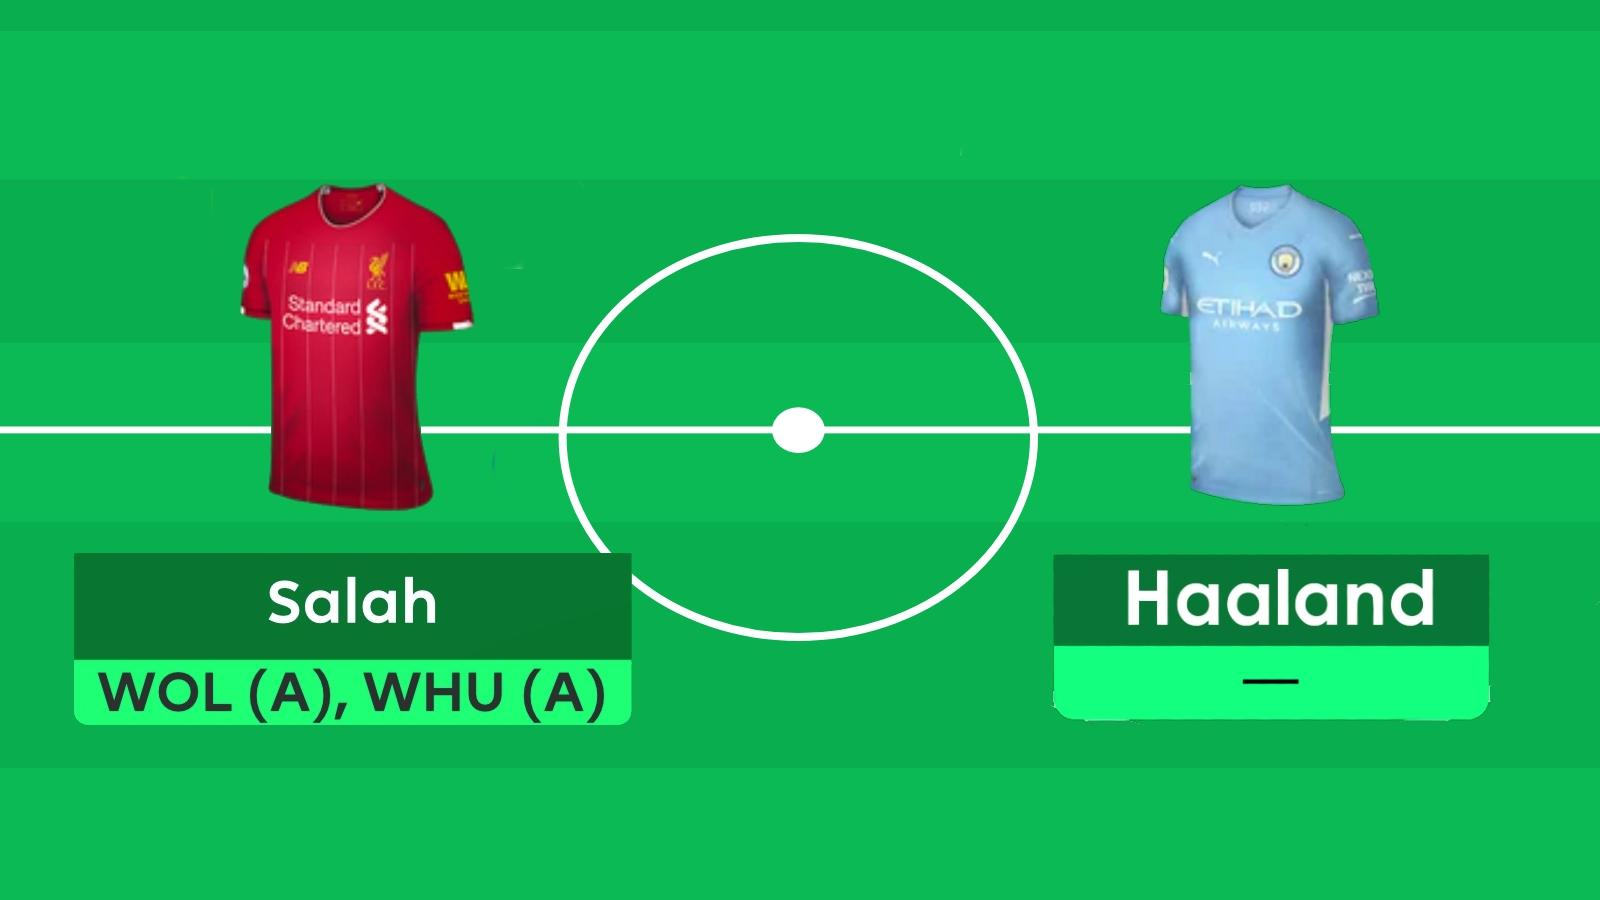 Salah and Haaland in FPL with blank and double gameweeks